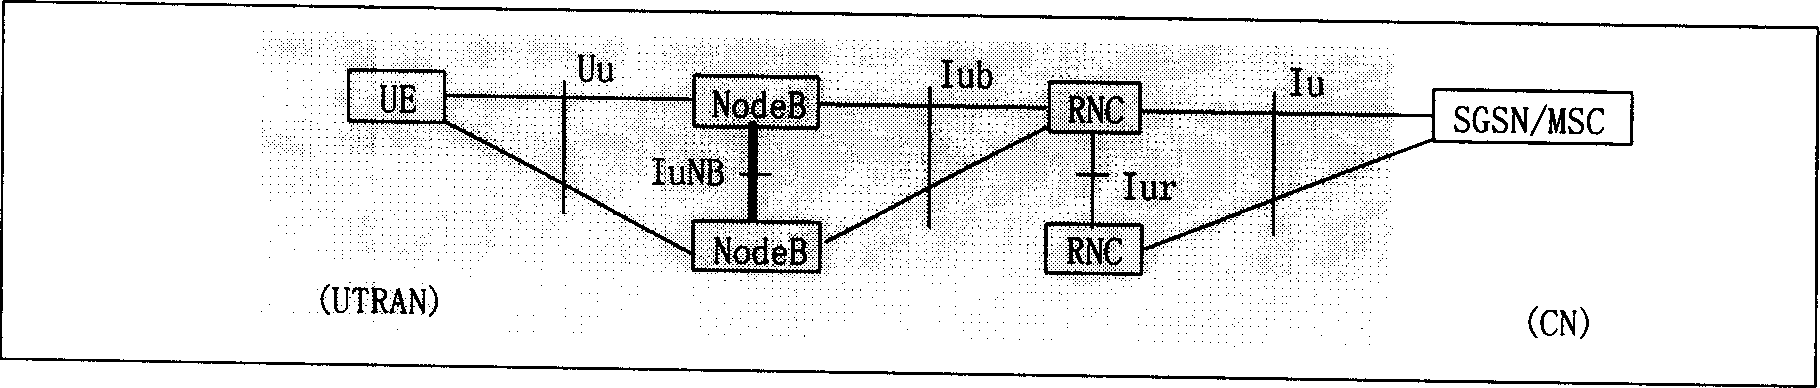 Method of implementing direct communication between base stations